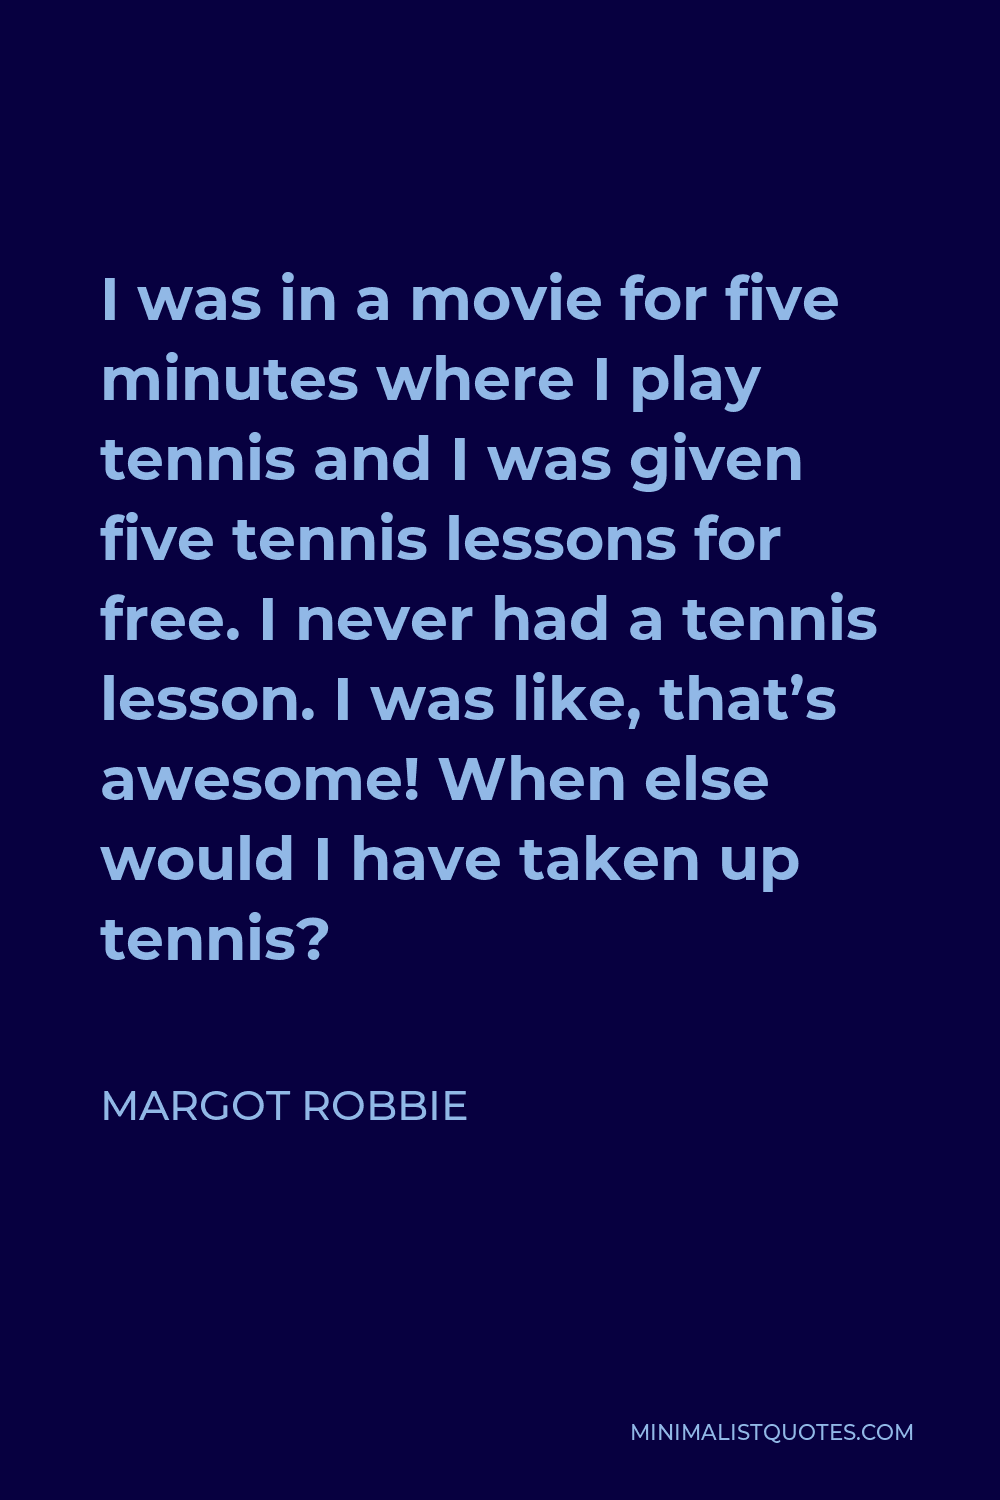 Margot Robbie Quote - I was in a movie for five minutes where I play tennis and I was given five tennis lessons for free. I never had a tennis lesson. I was like, that’s awesome! When else would I have taken up tennis?